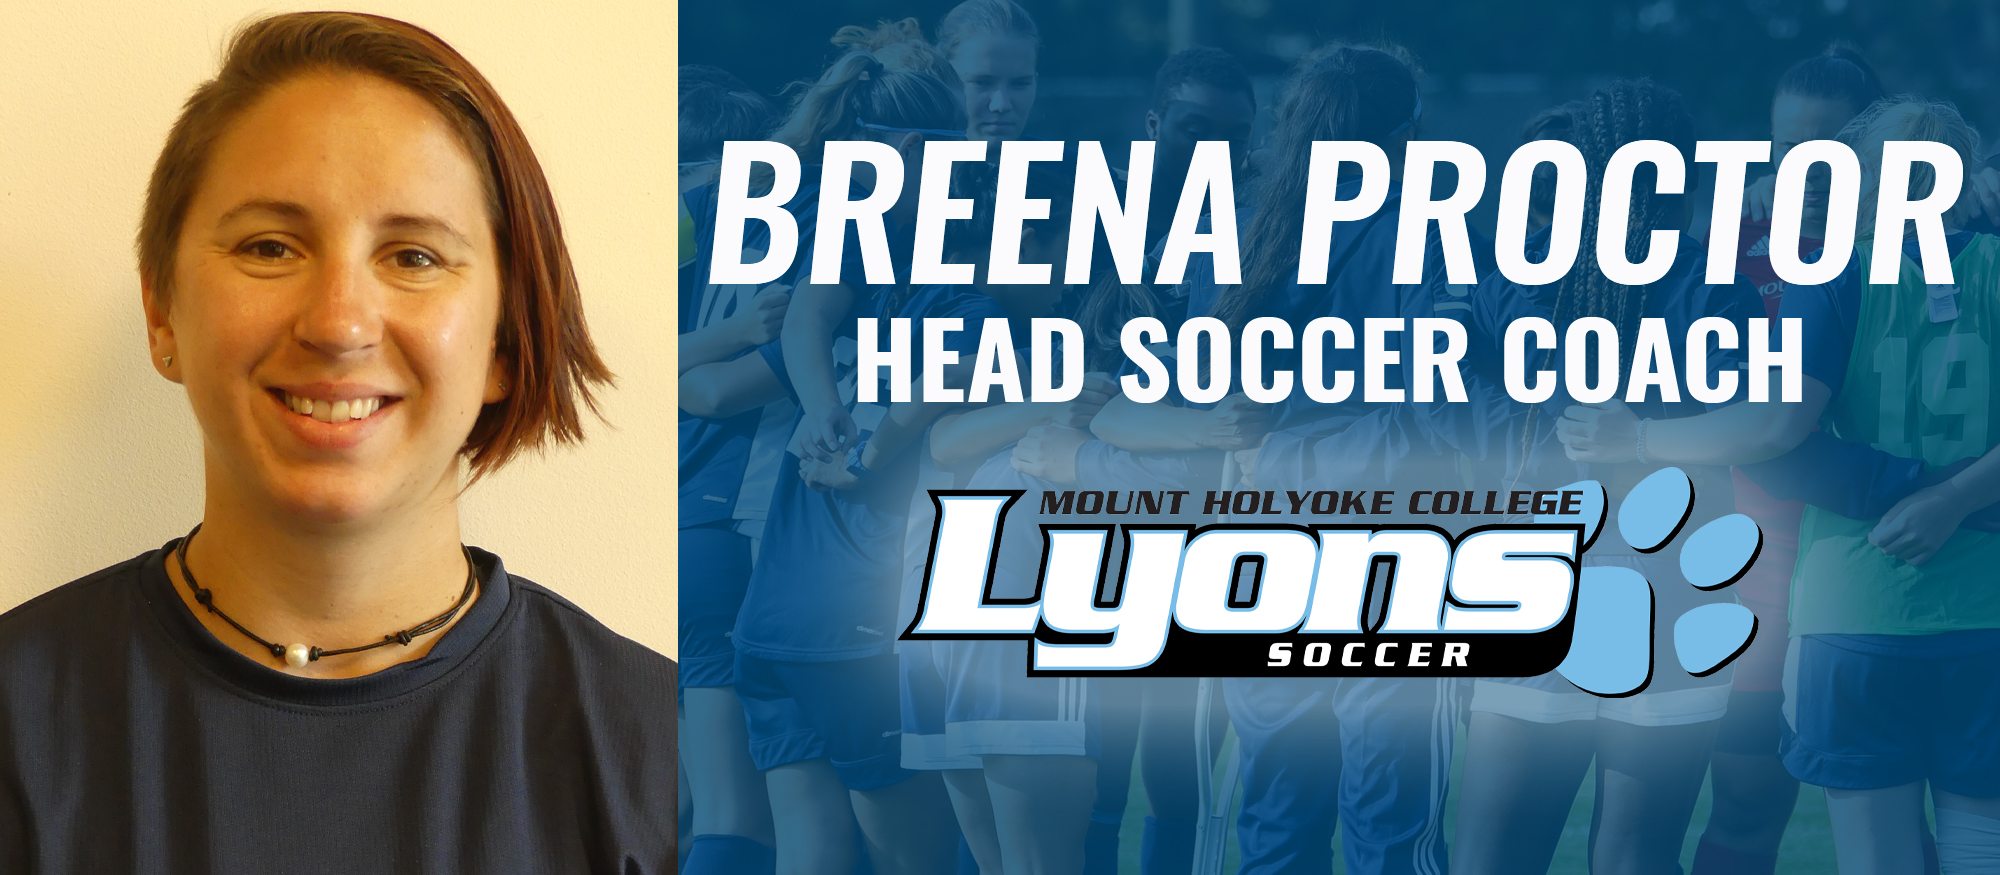 Breena Proctor Named Head Soccer Coach at Mount Holyoke College